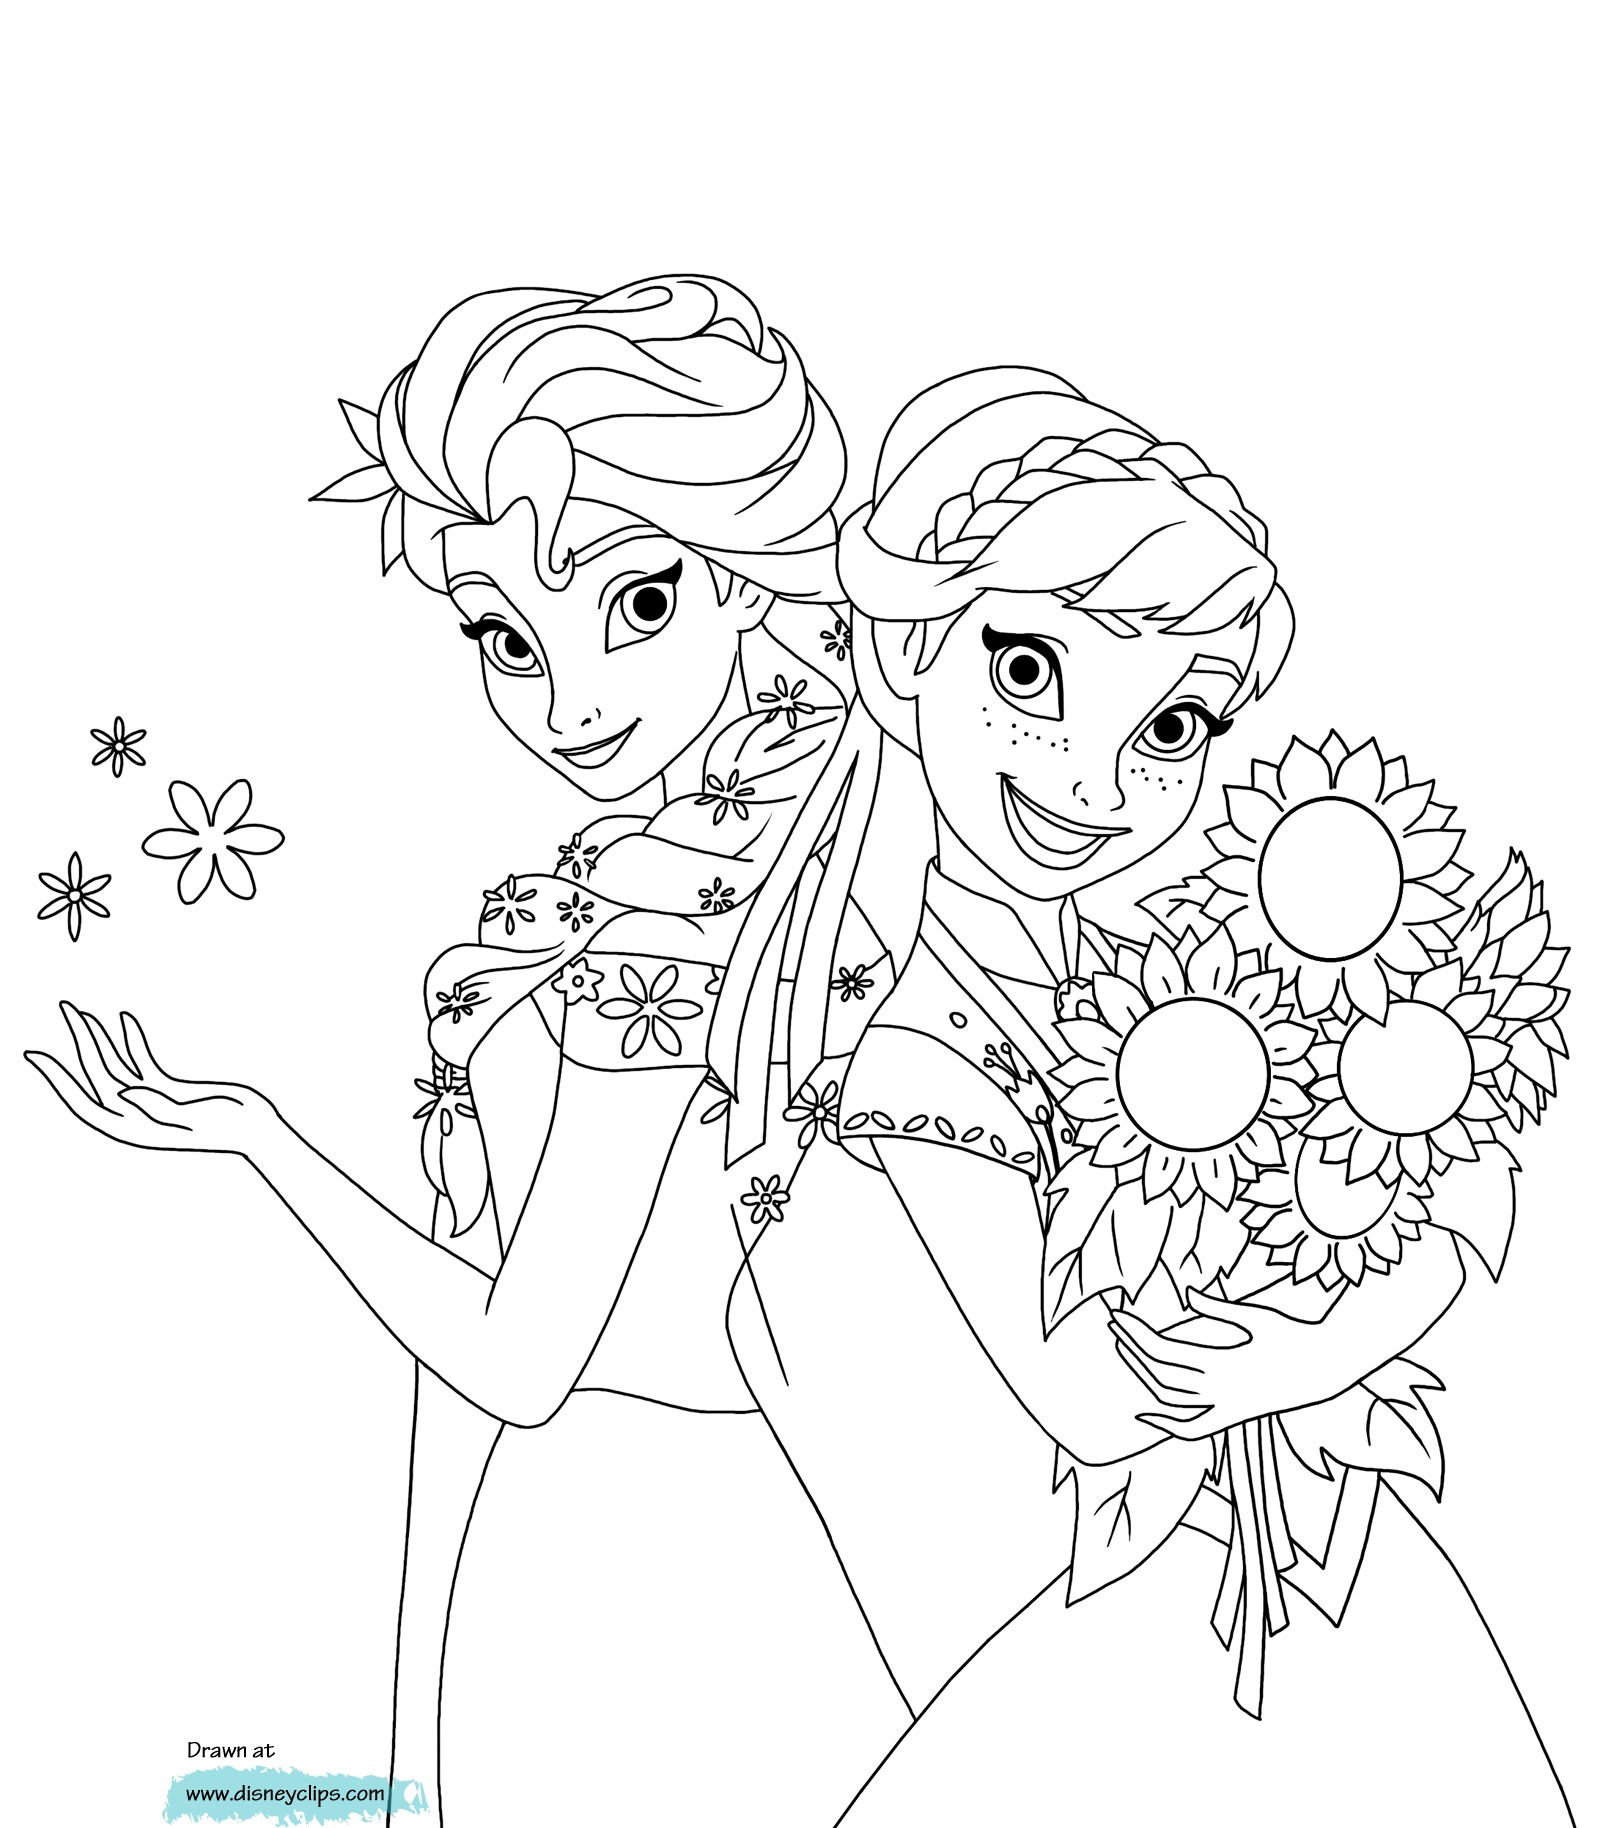 Frozen Coloring Pages Pdf at GetColorings com Free printable